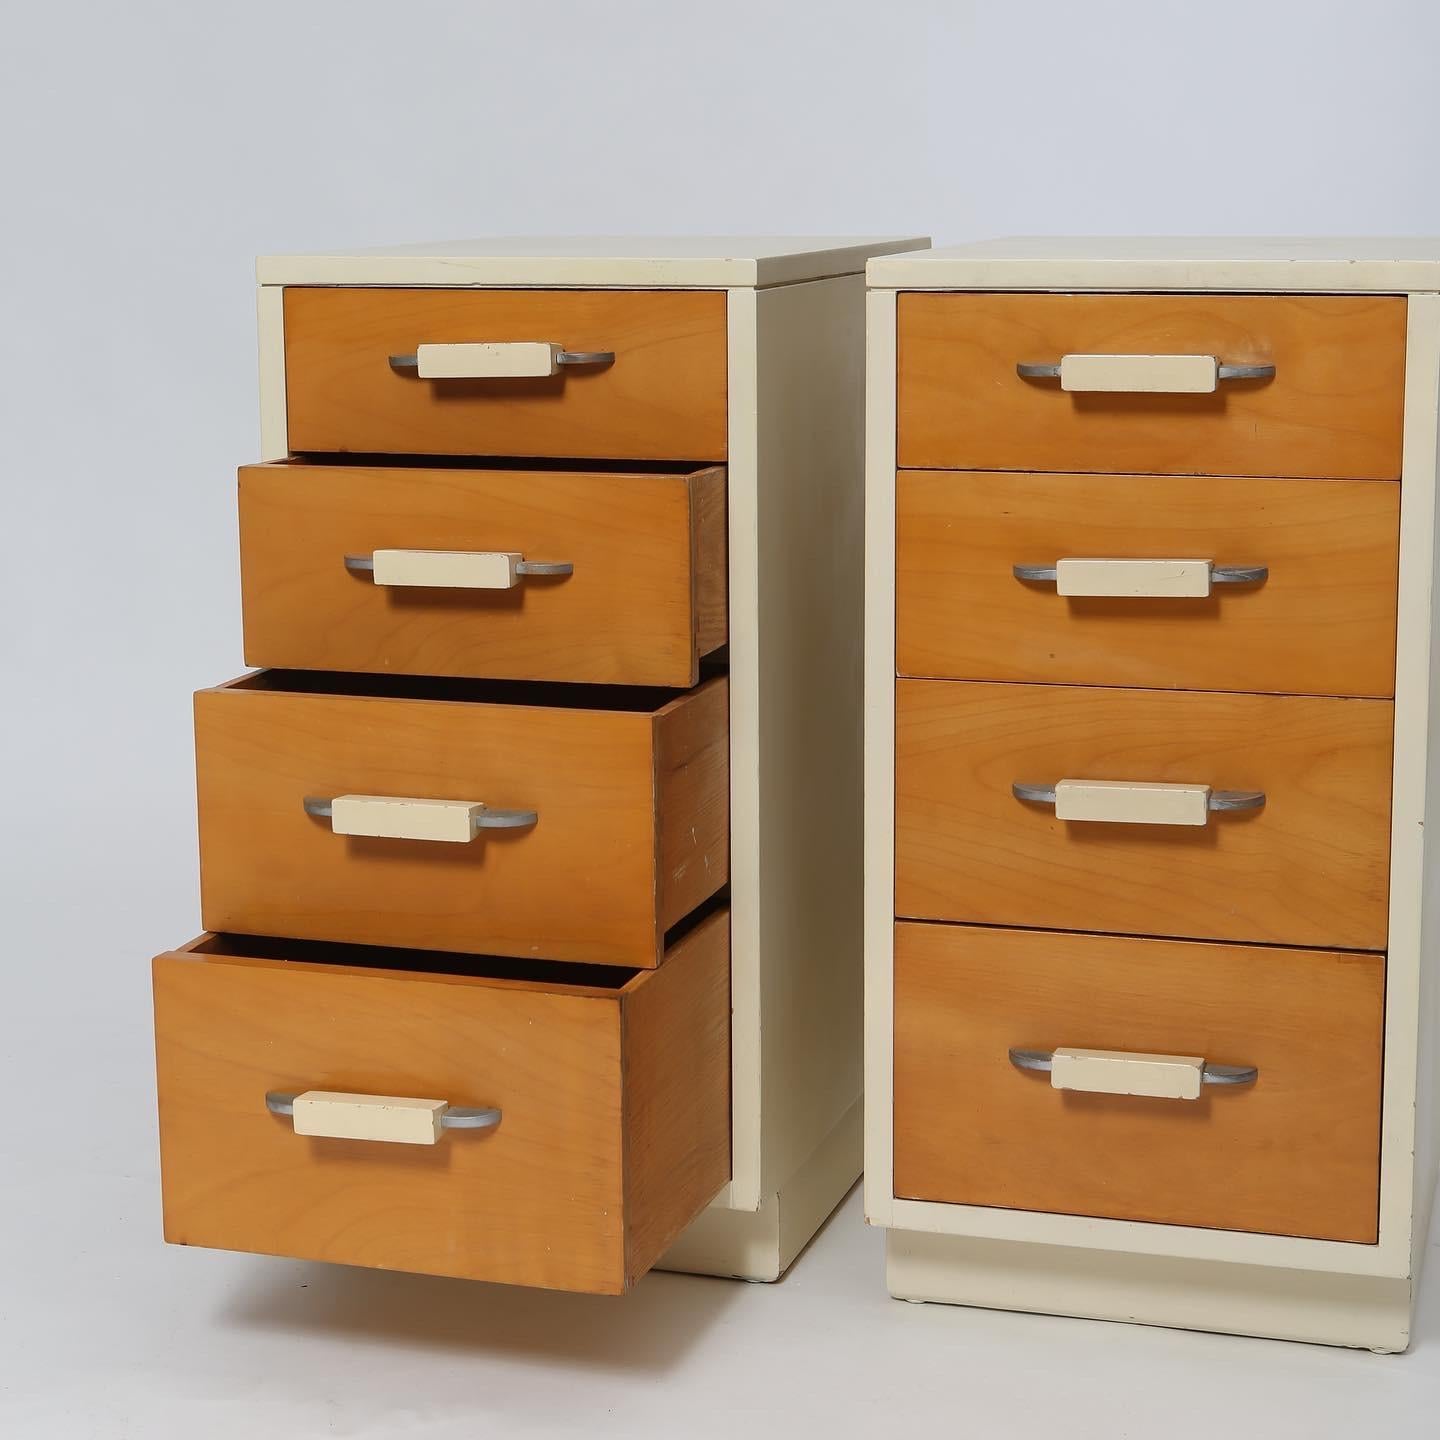 Part of the collection “Modern coordinates” by father and daughter Saarinen design team for Johnson Furniture, these storage tables are versatile and stylish. Lacquered ivory case with birch fronts and painted wood pulls. Four drawers ascending in